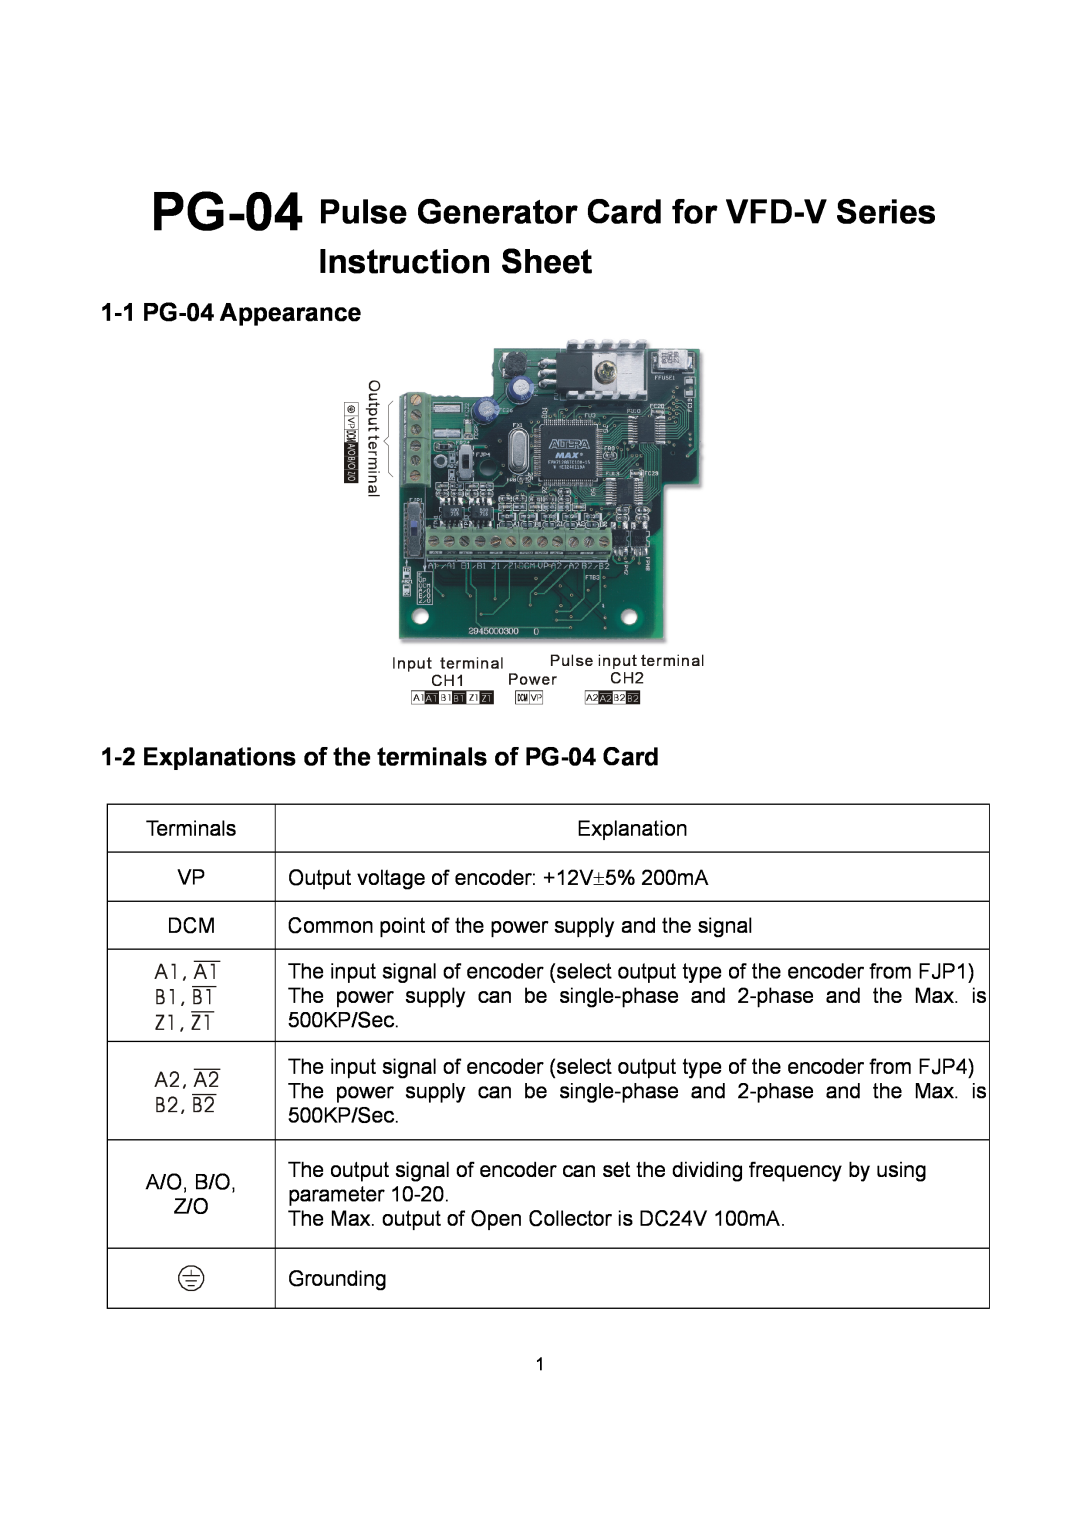 Delta Electronics instruction sheet 1-1 PG-04 Appearance, Explanations of the terminals of PG-04 Card 